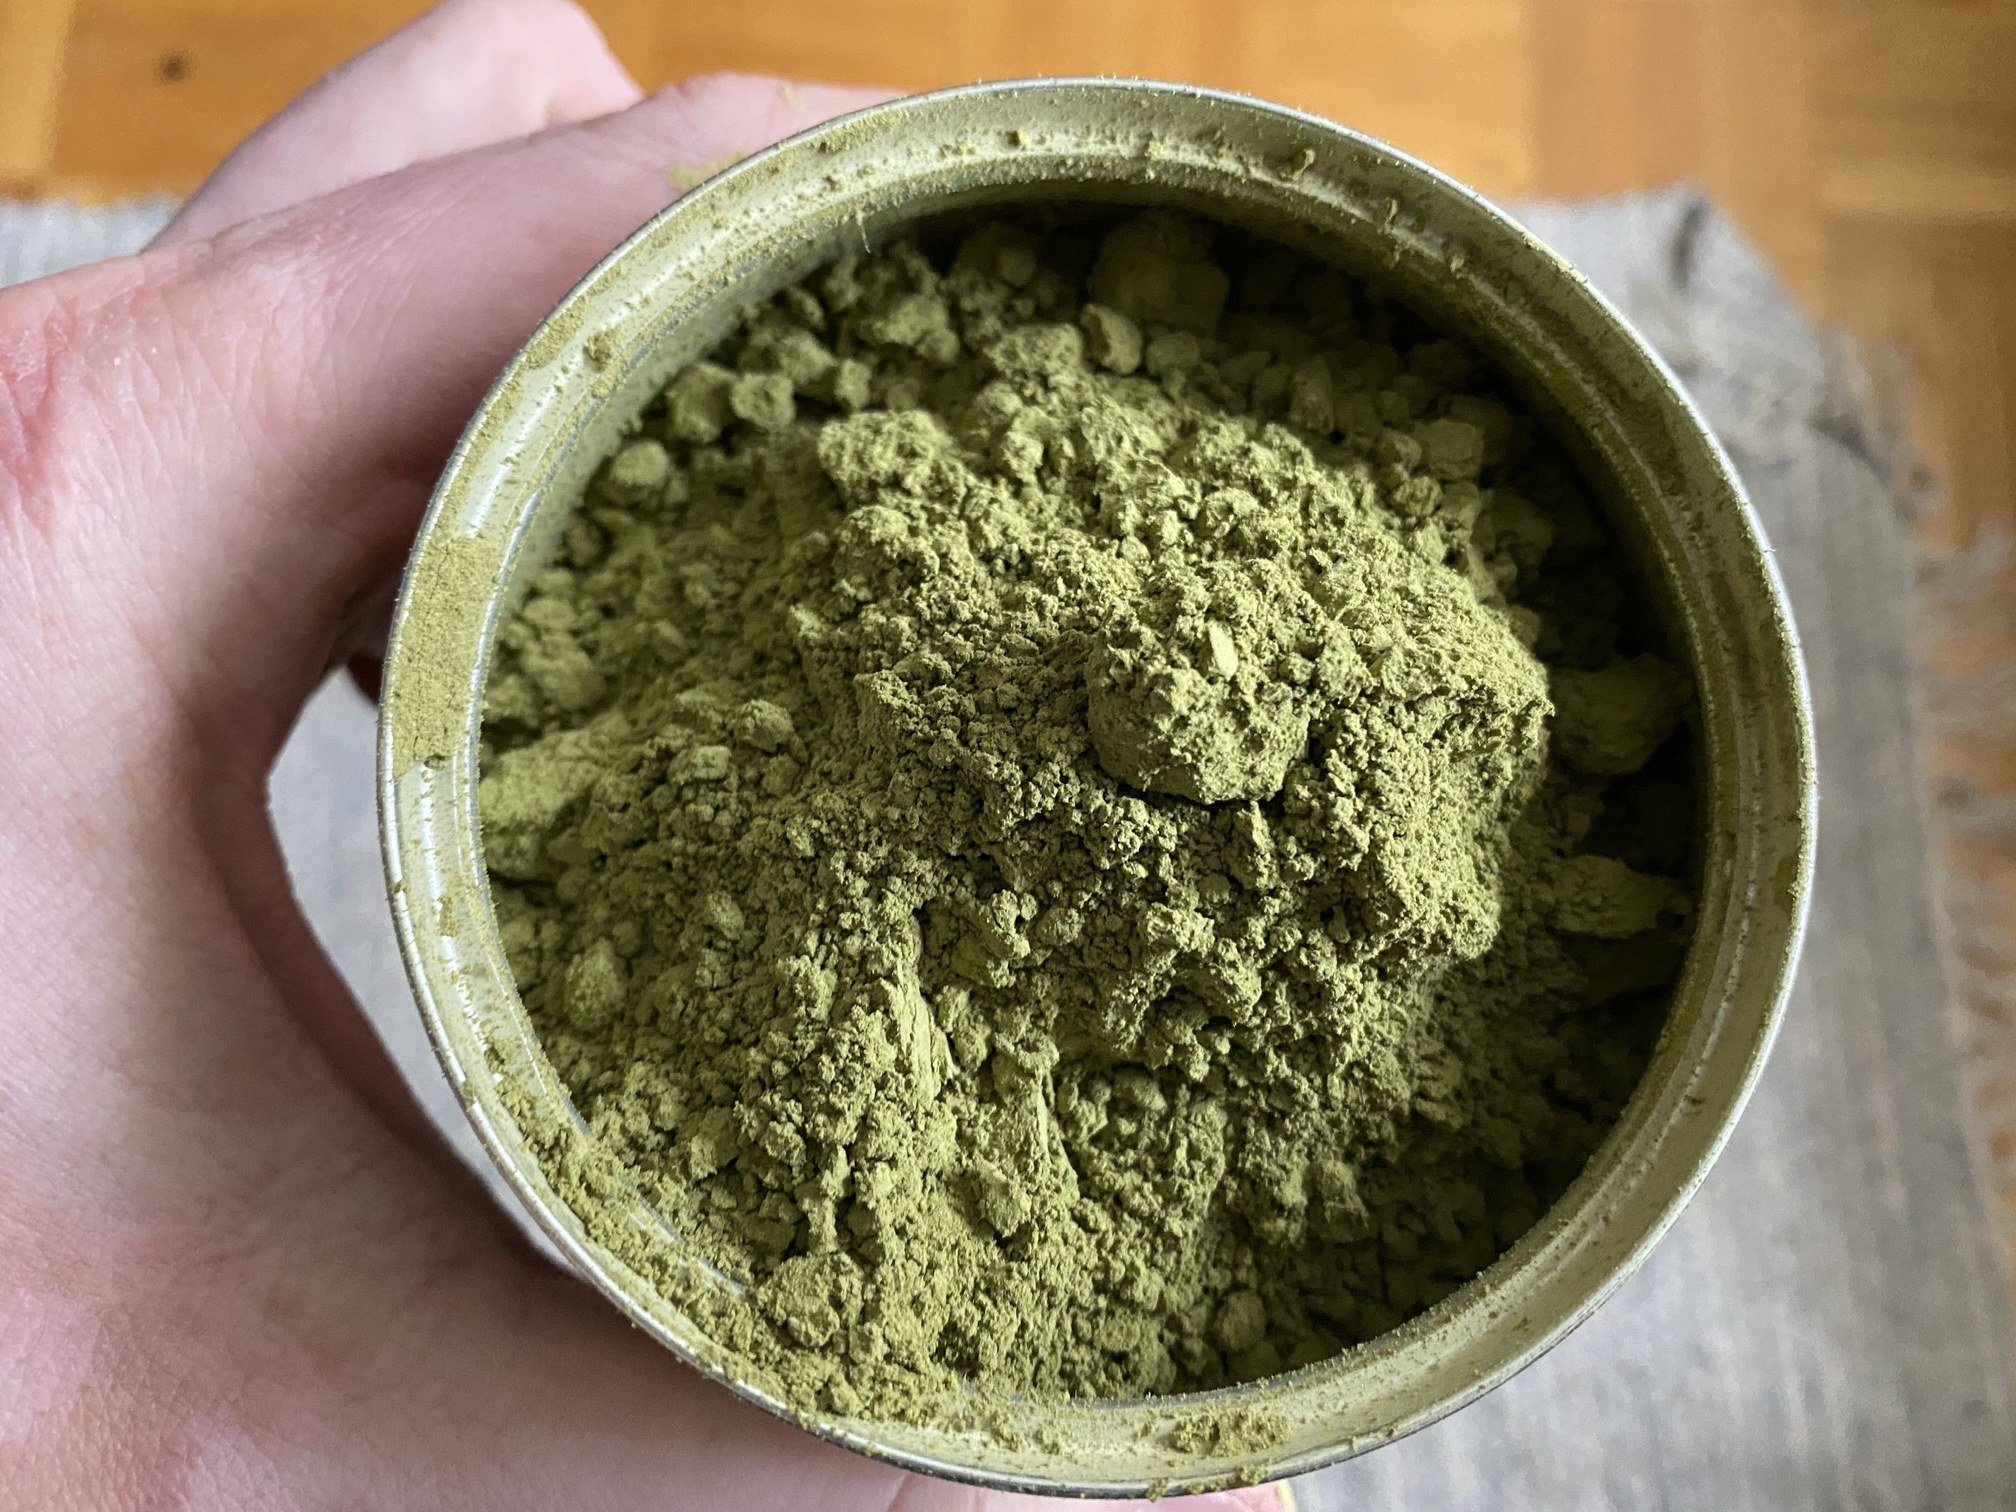 All you need to know before you buy kratom